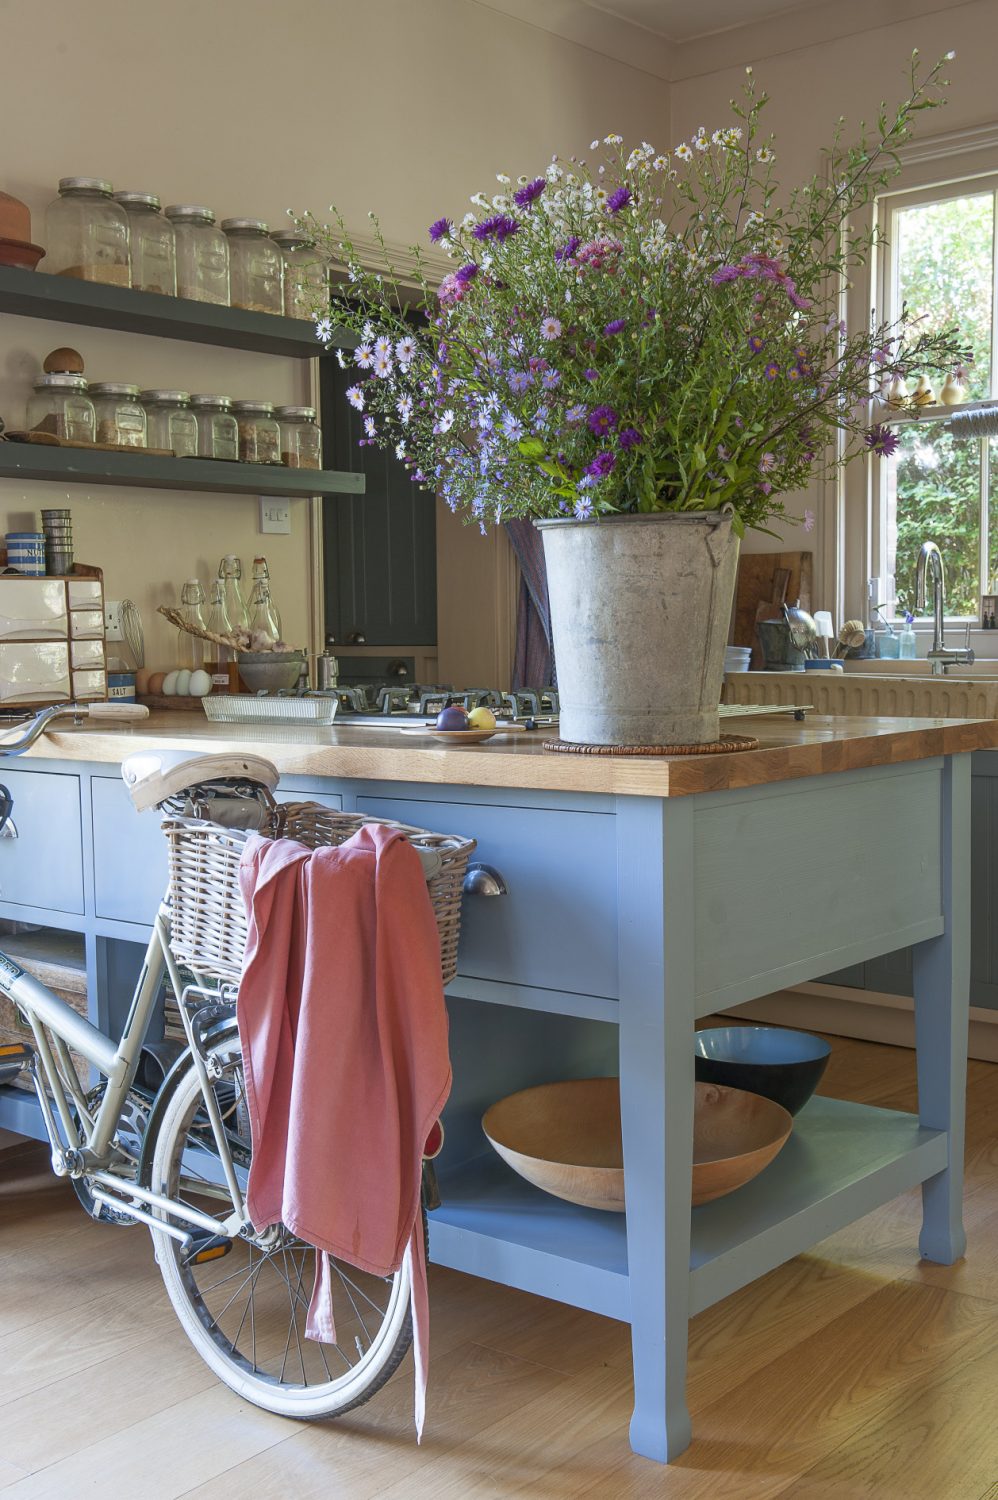 Francine’s much-loved 1960s bicycle, which she bought locally, is perfect for nipping to the shops. It lives in the kitchen, propped up against a kitchen unit built by Francine’s son Jacques